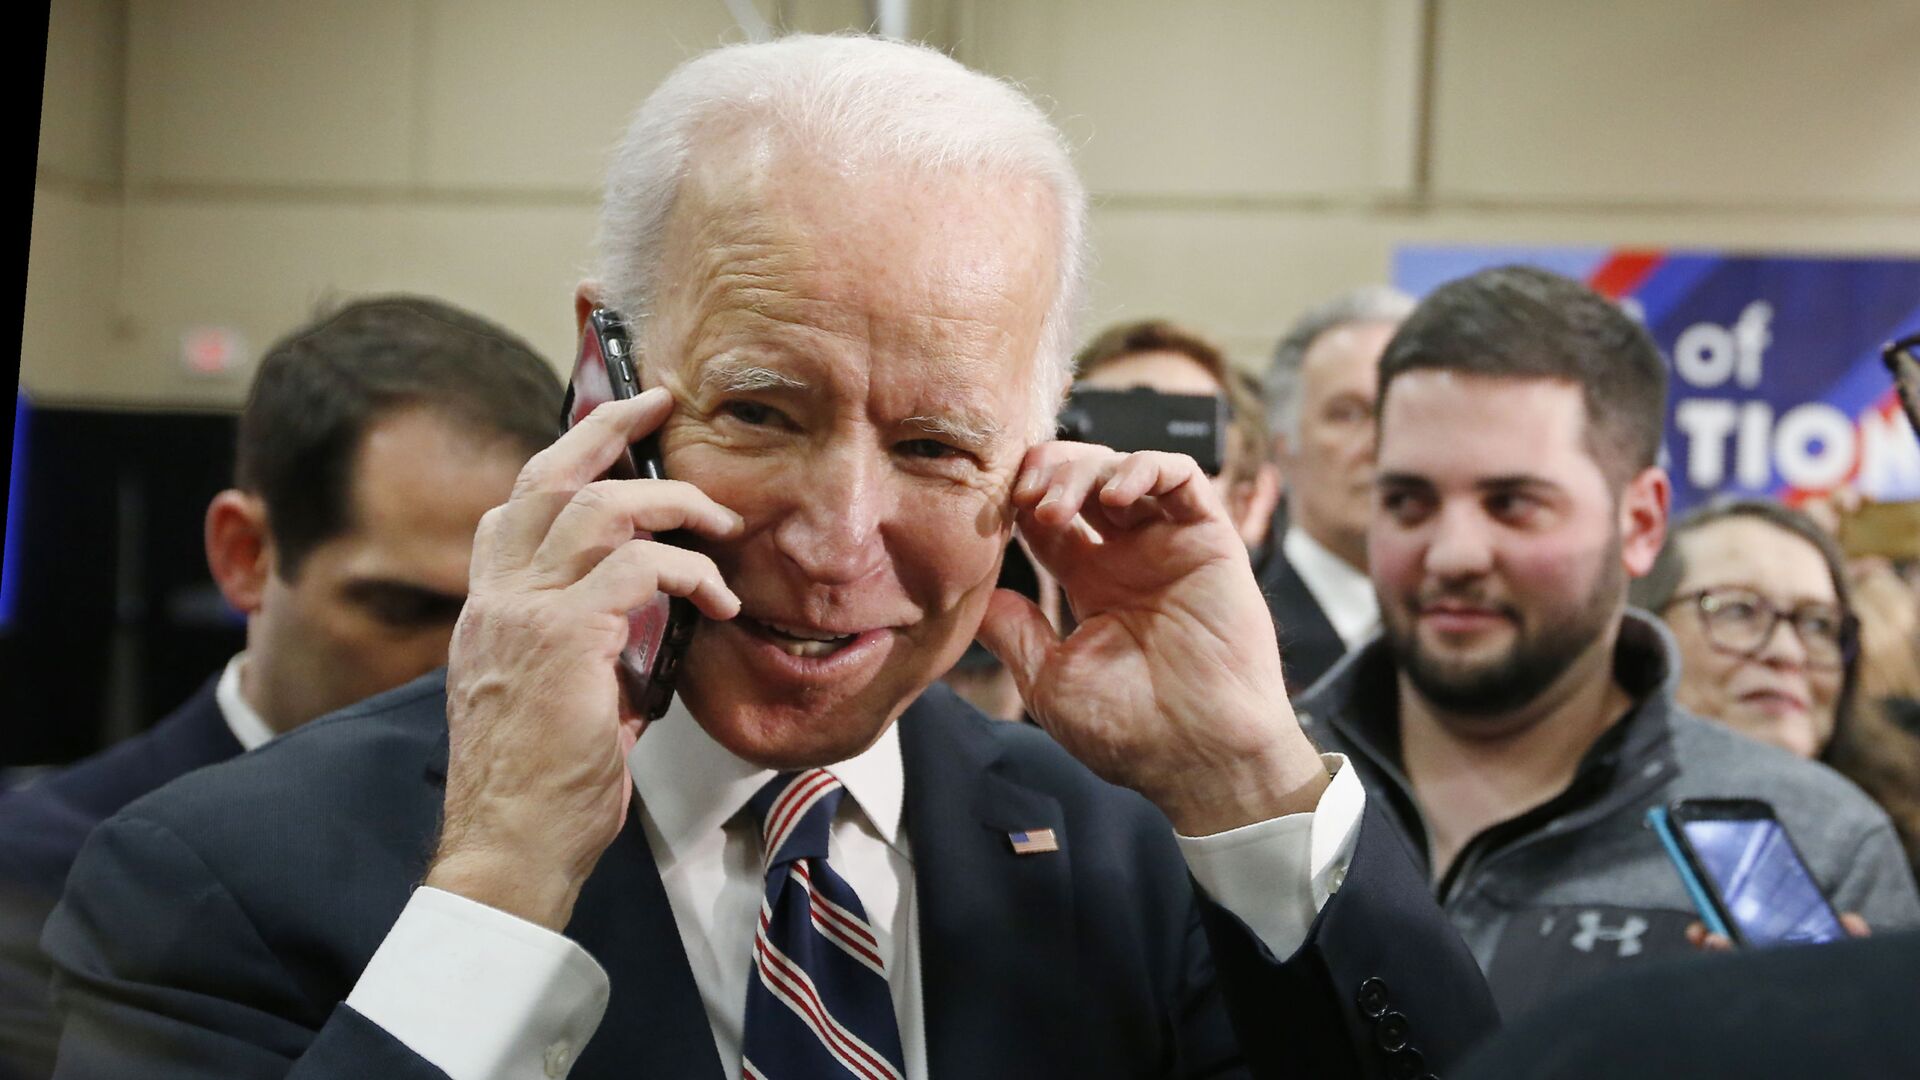 Democratic presidential candidate former Vice President Joe Biden talks on the phone as he greets people during a campaign event Thursday, Jan. 30, 2020, in Waukee, Iowa.  - Sputnik International, 1920, 21.07.2021